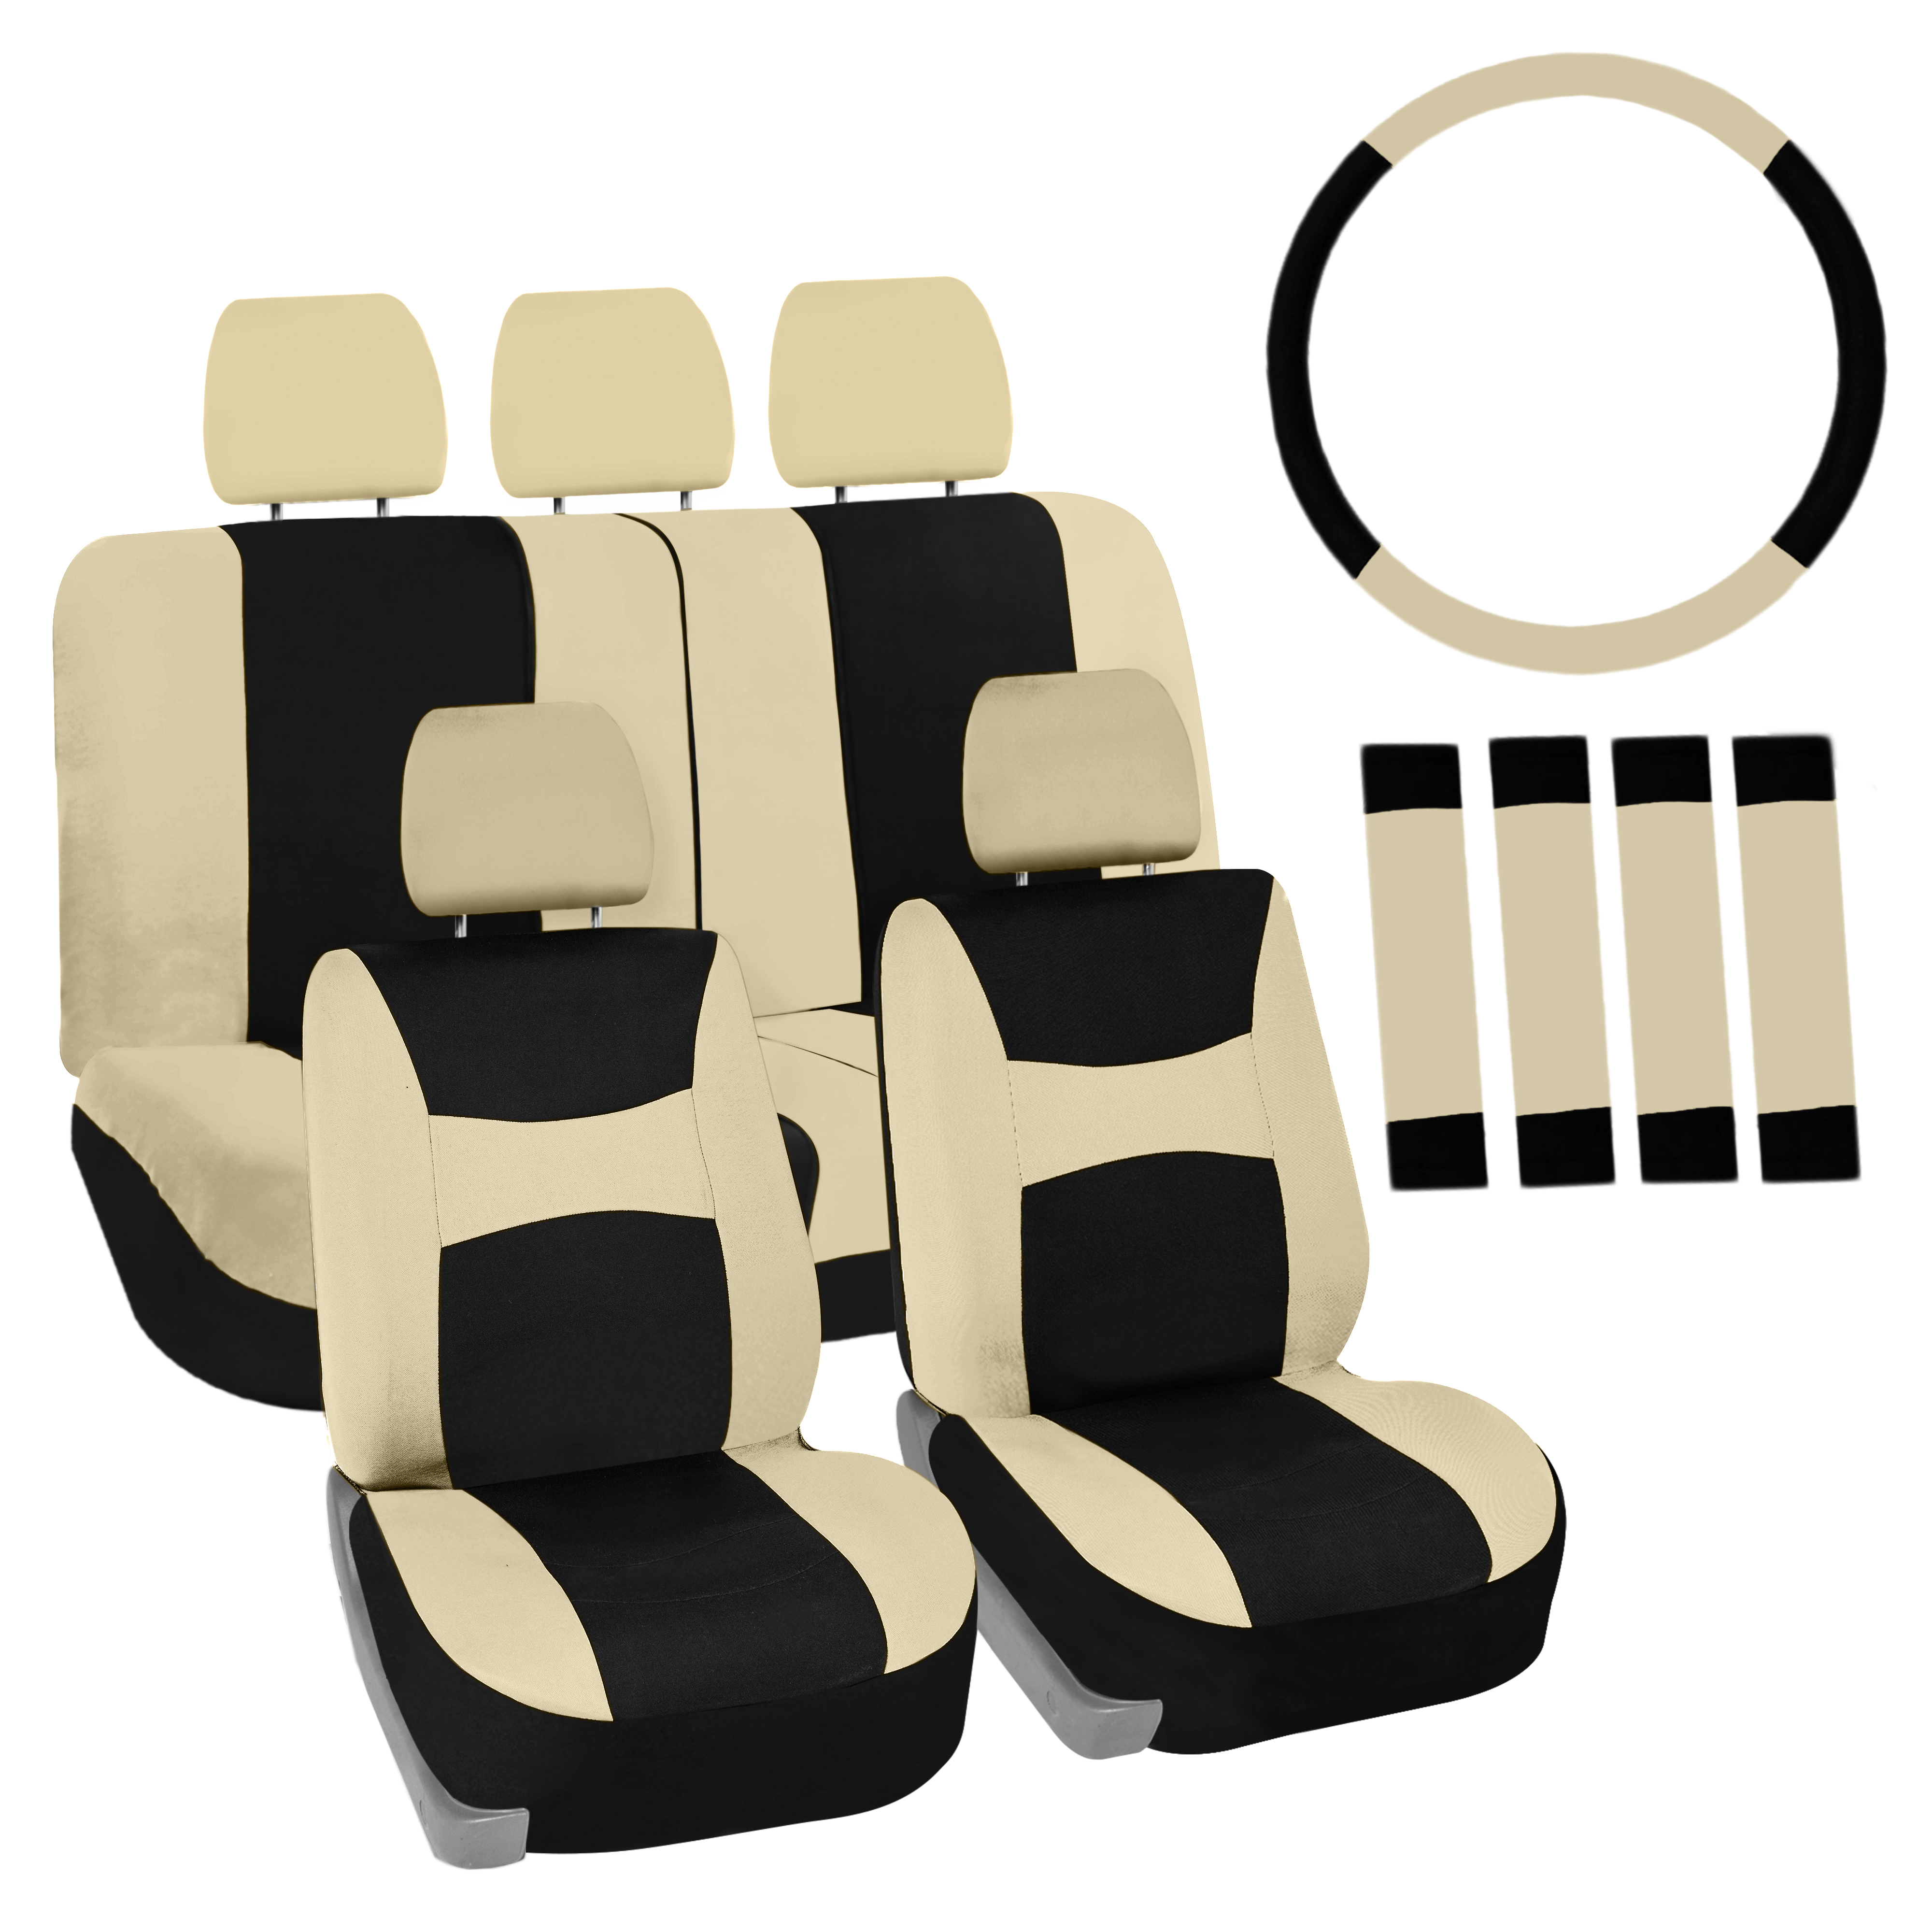 FH Group Auto Seat Covers Car Truck SUV Universal Covers w/Accessories 11 Colors